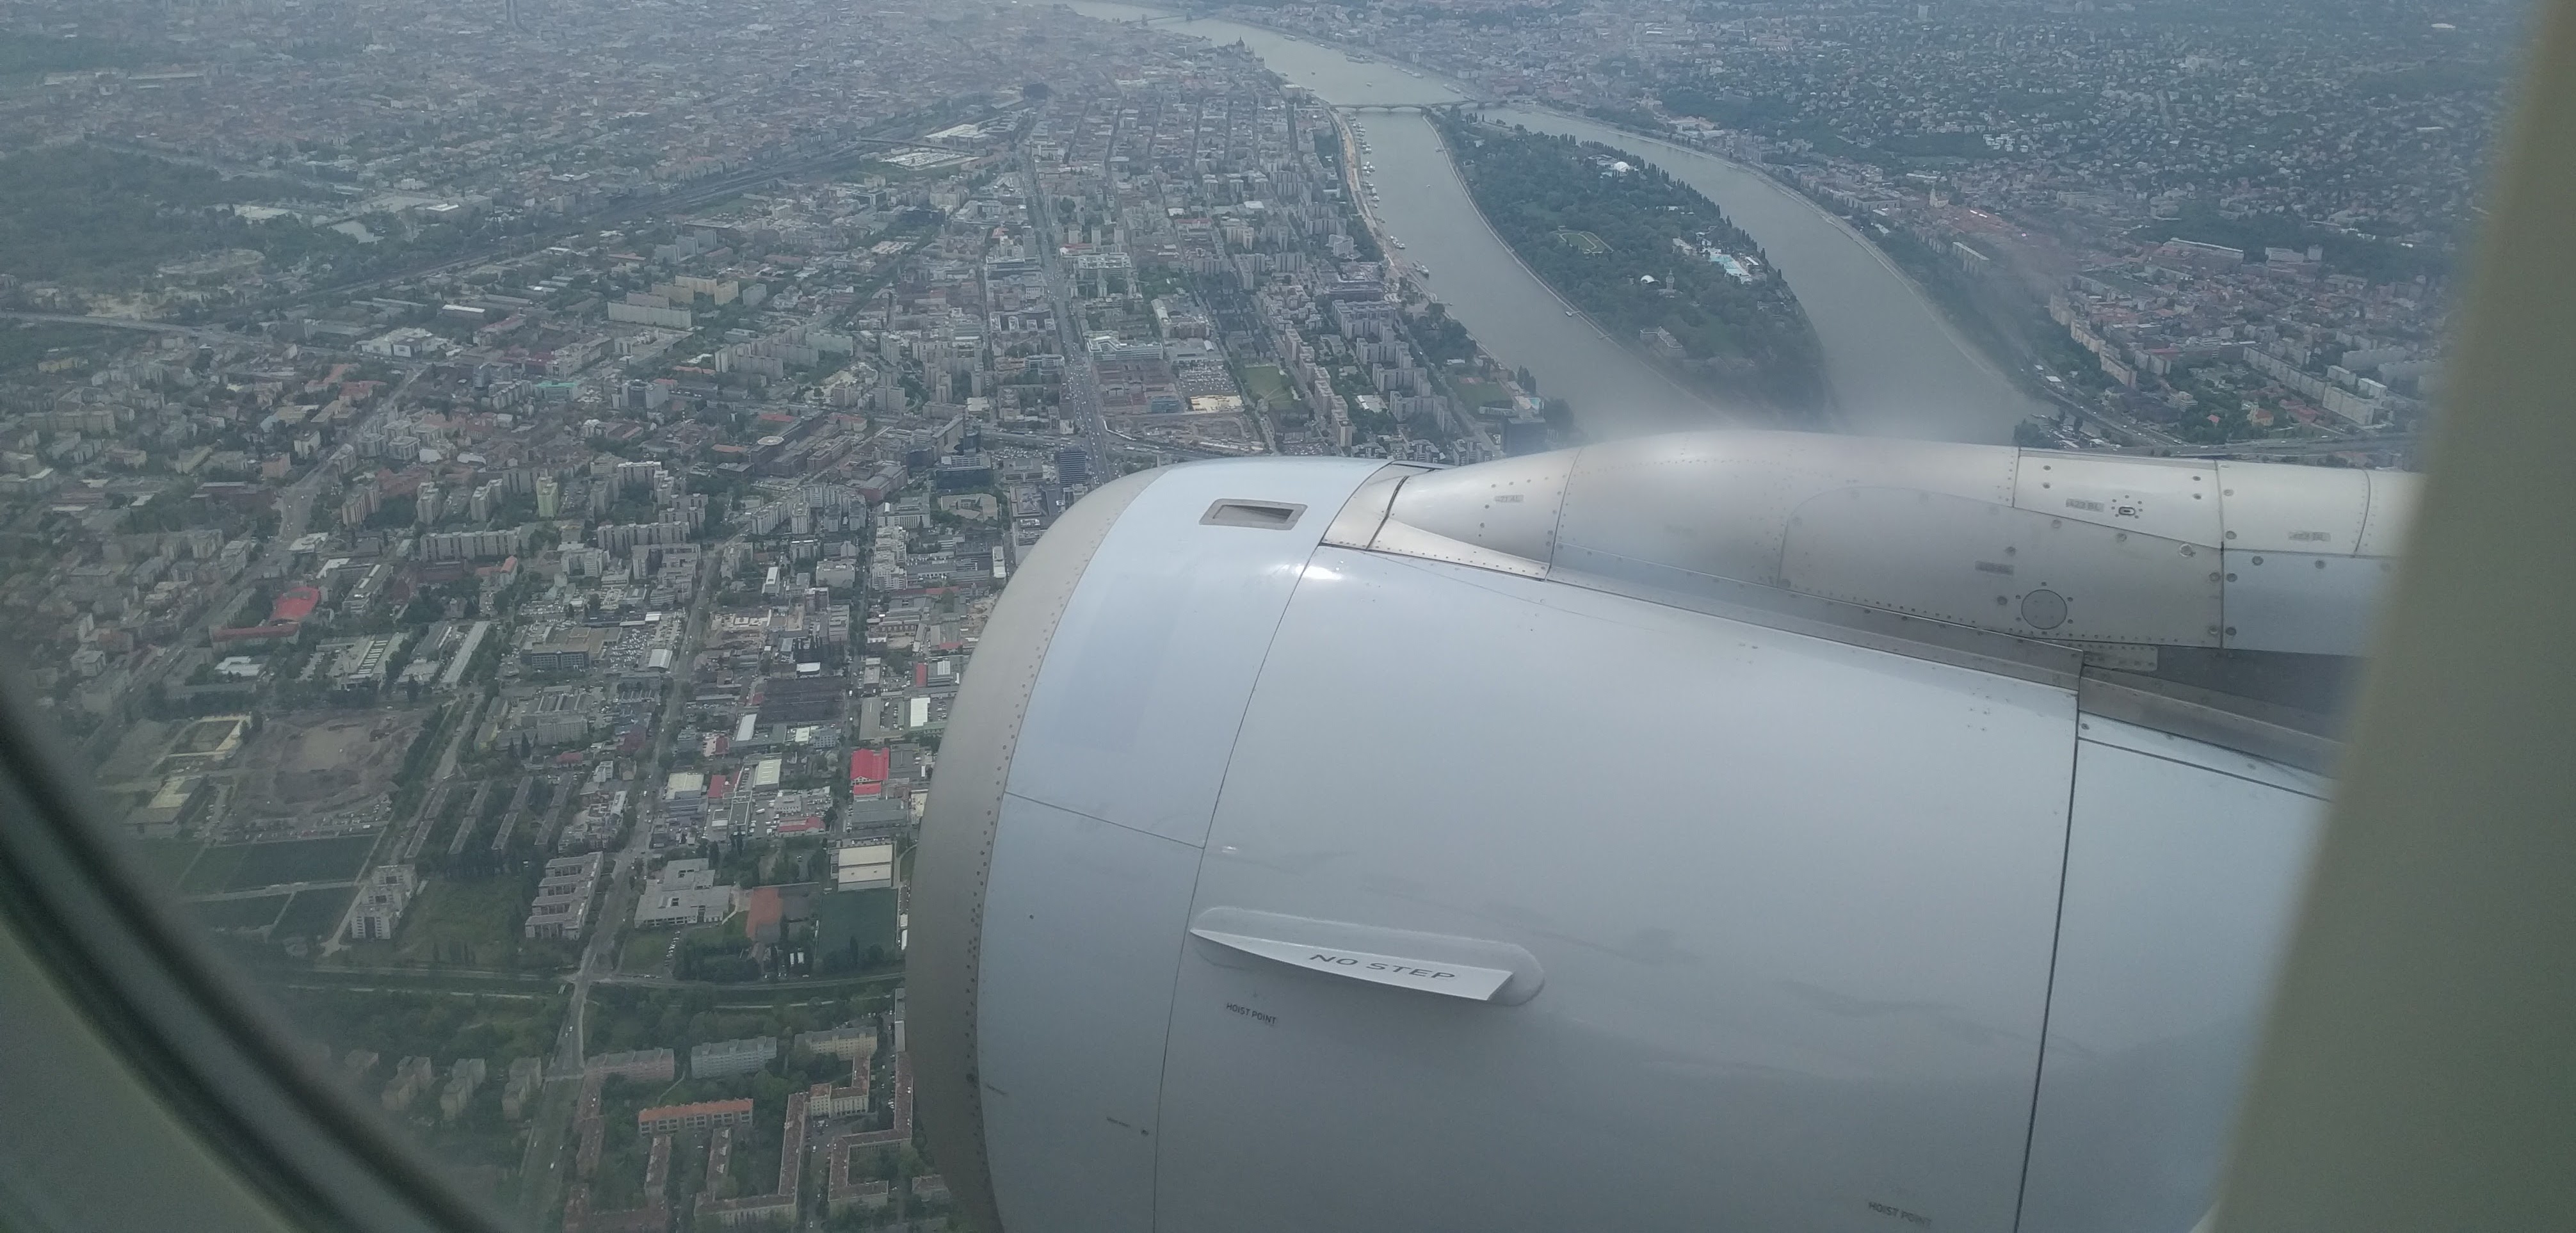 Landing in Budapest for the second time